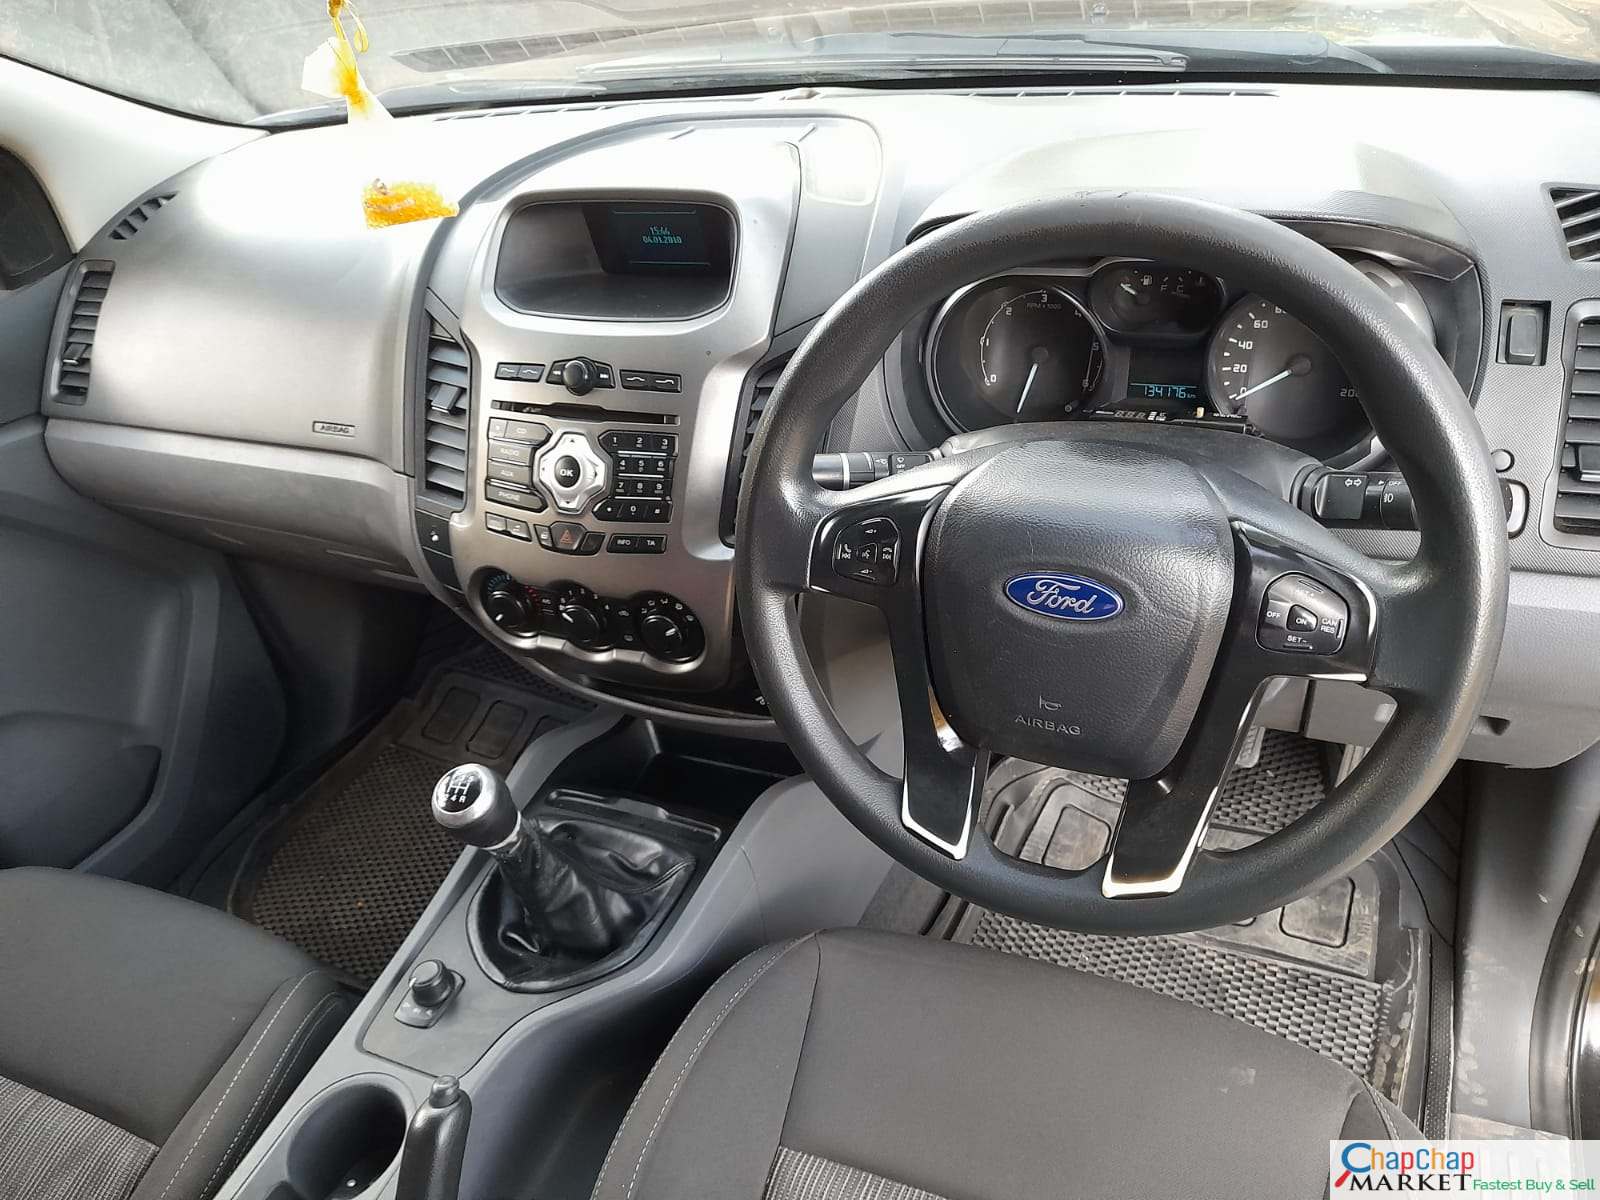 Ford Ranger 2015 QUICK SALE You Pay 30% DEPOSIT INSTALLMENTS TRADE IN OK EXCLUSIVE